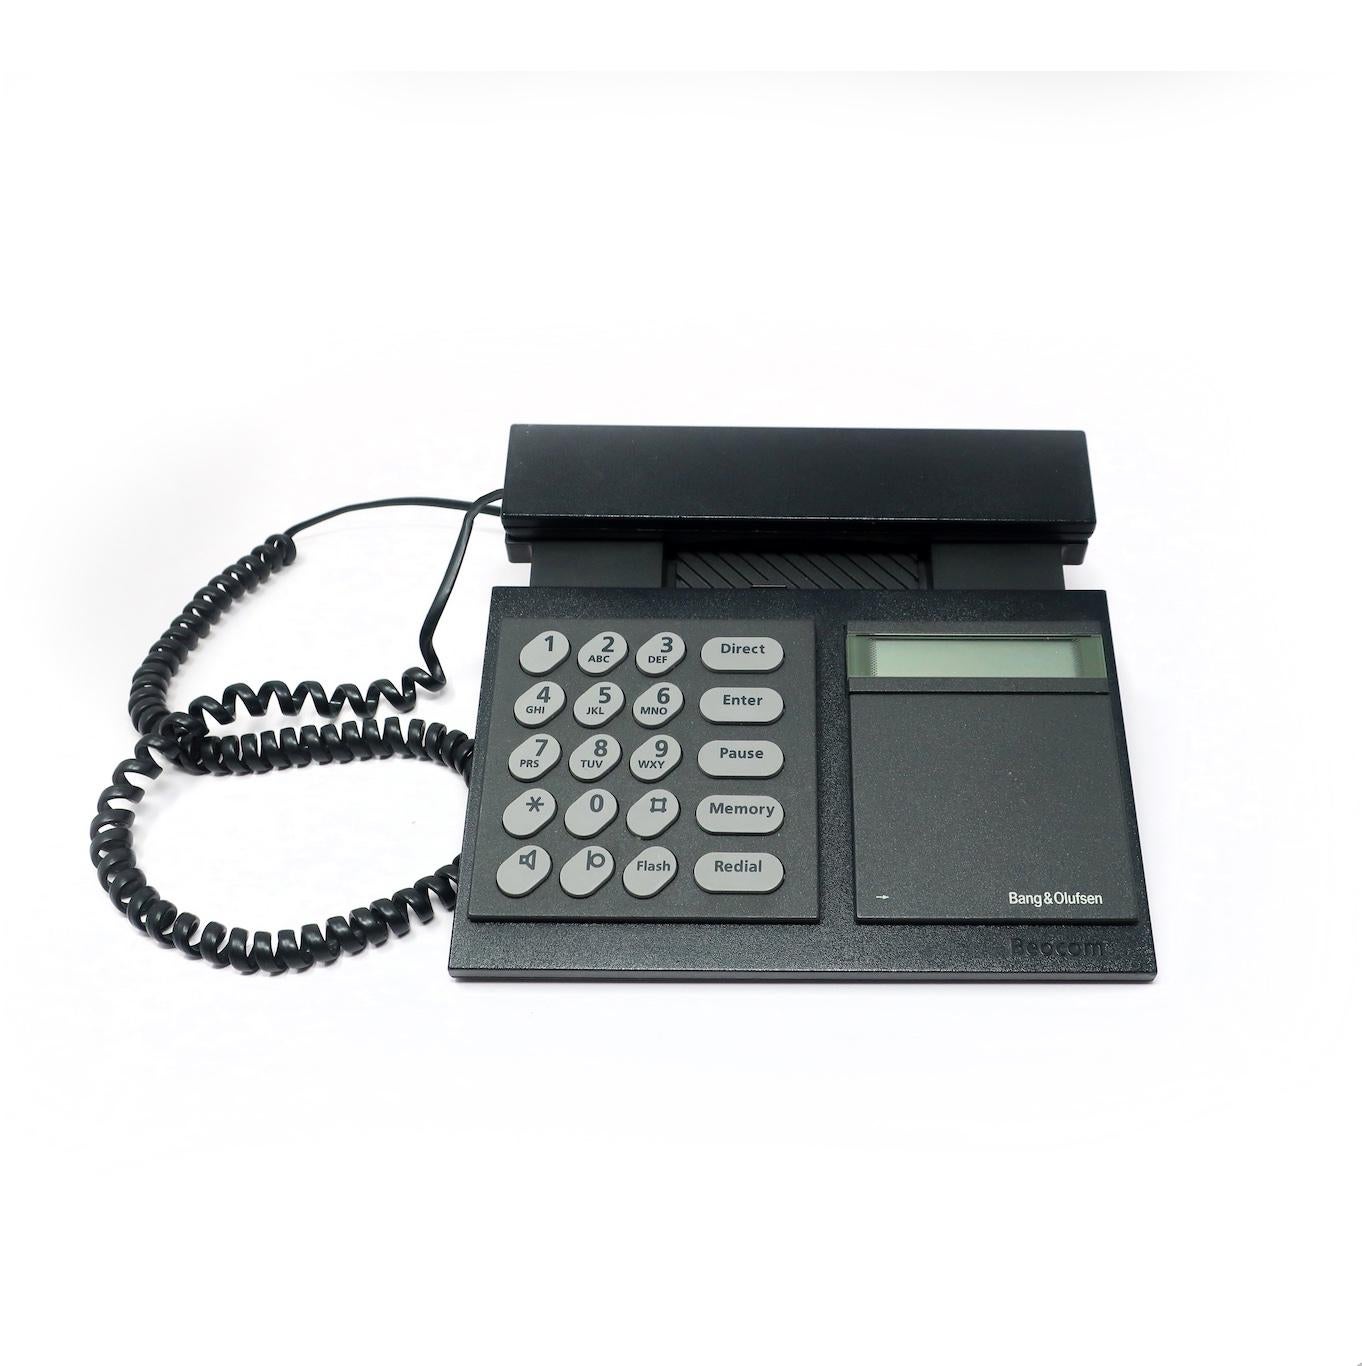 Designed in 1986 by Lone and Gideon Lindinger-Lowy, the Bang & Olufsen Beocom 2000 telephone is Danish design at its finest, and the epitome of 1980s high-tech and high design. It has a black handset and base with gray buttons. 

In vintage